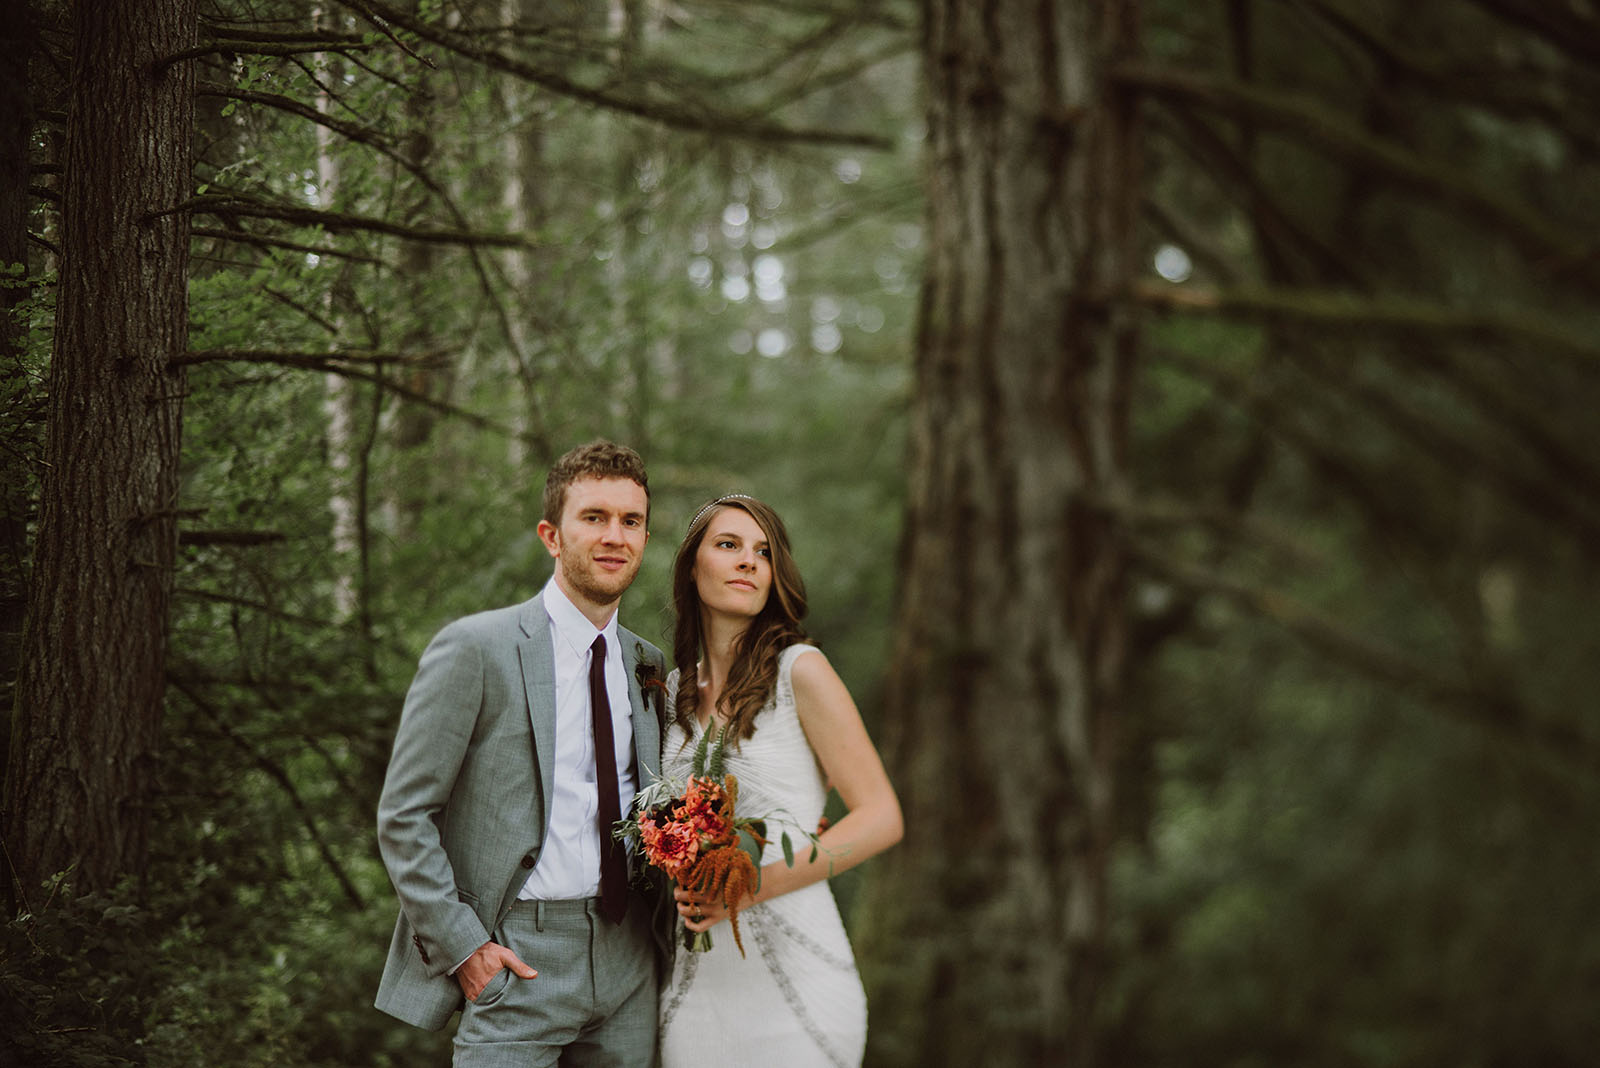 Bride and Groom portrait at Pendarvis Farm | Woodsy Campground Wedding